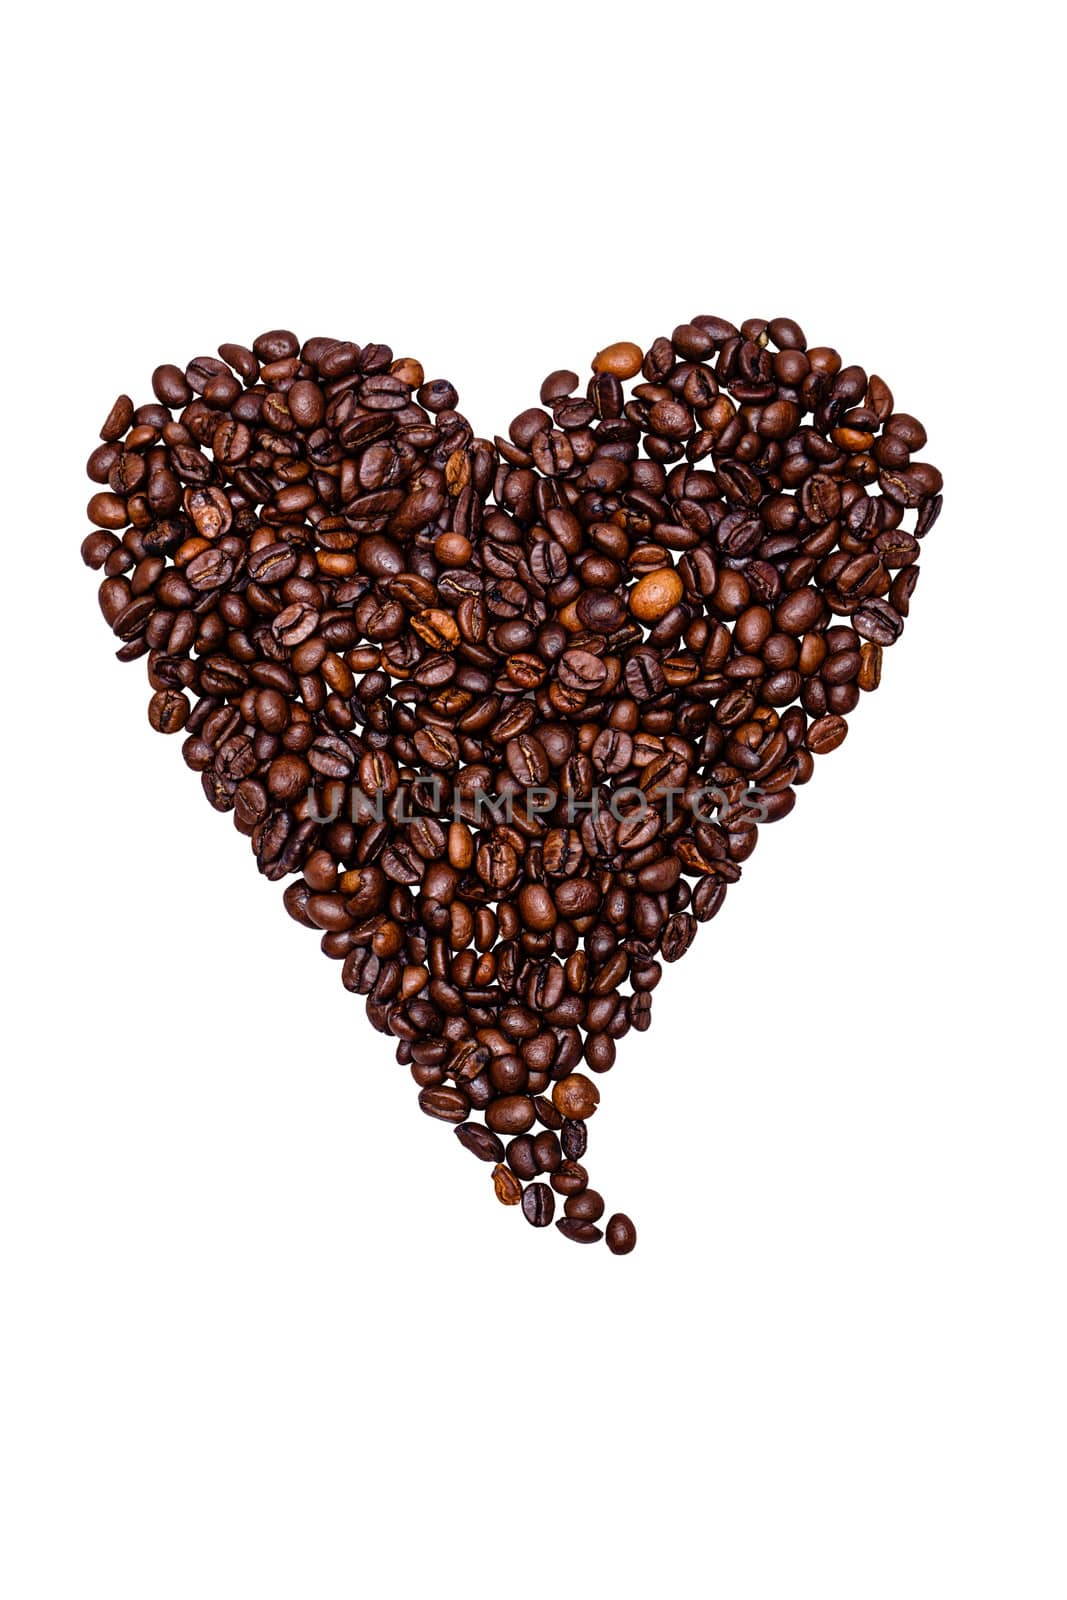 Coffee beans laid out a heart isolated on white background